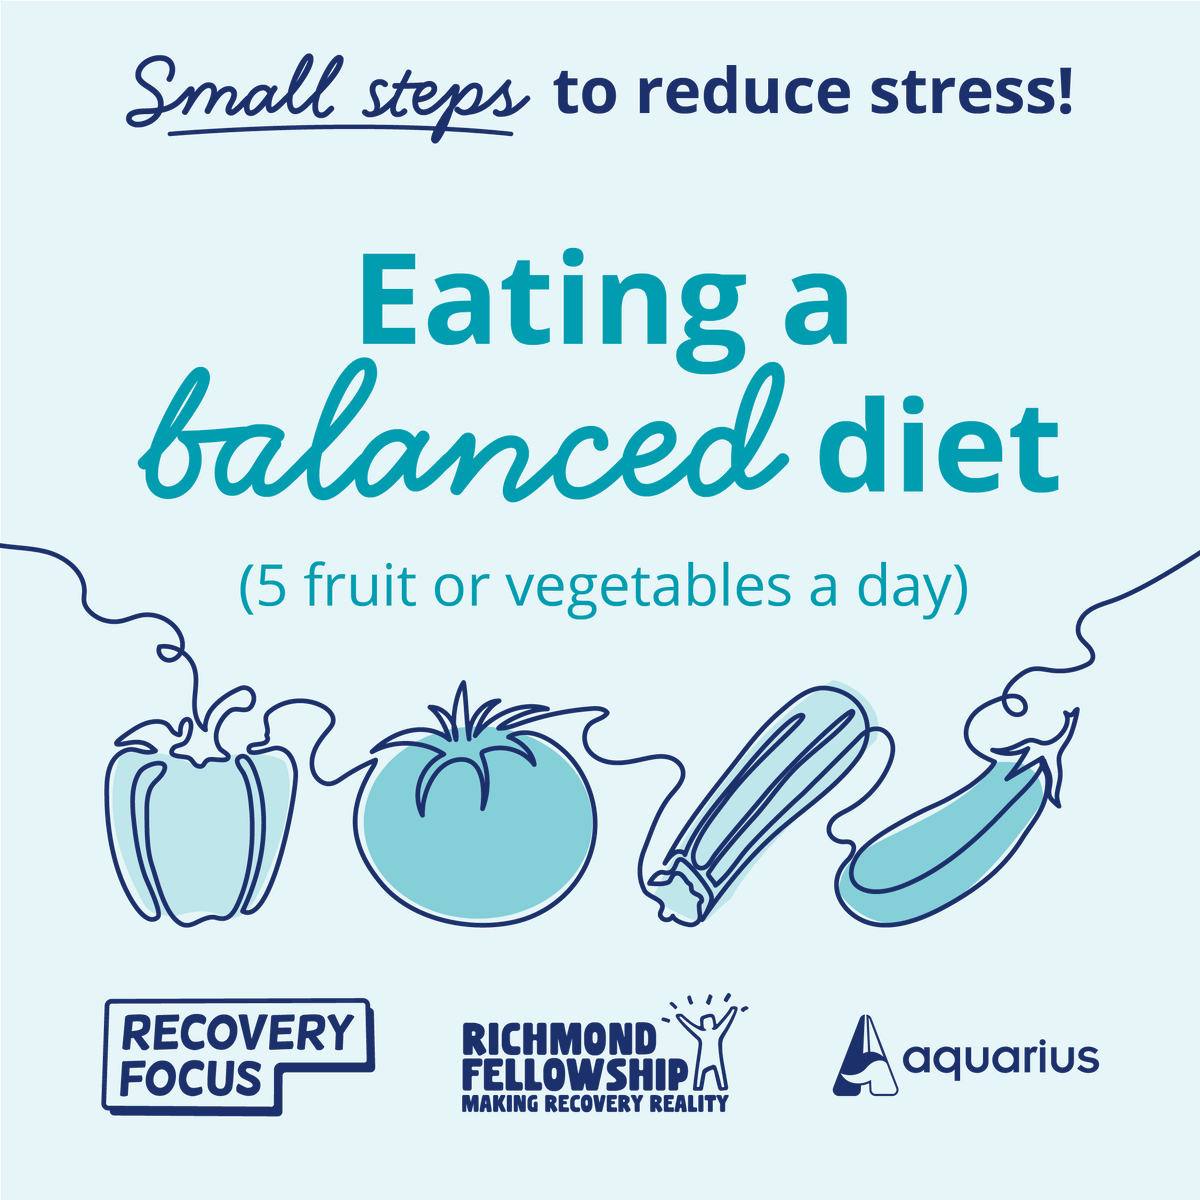 Stress reduction starts with what we eat and how we look after our bodies 🍎 Cortisol - 'the stress hormone' - can be regulated through eating healthy foods, fruits and vegetables! #StressAwarenessMonth #LittleByLittle